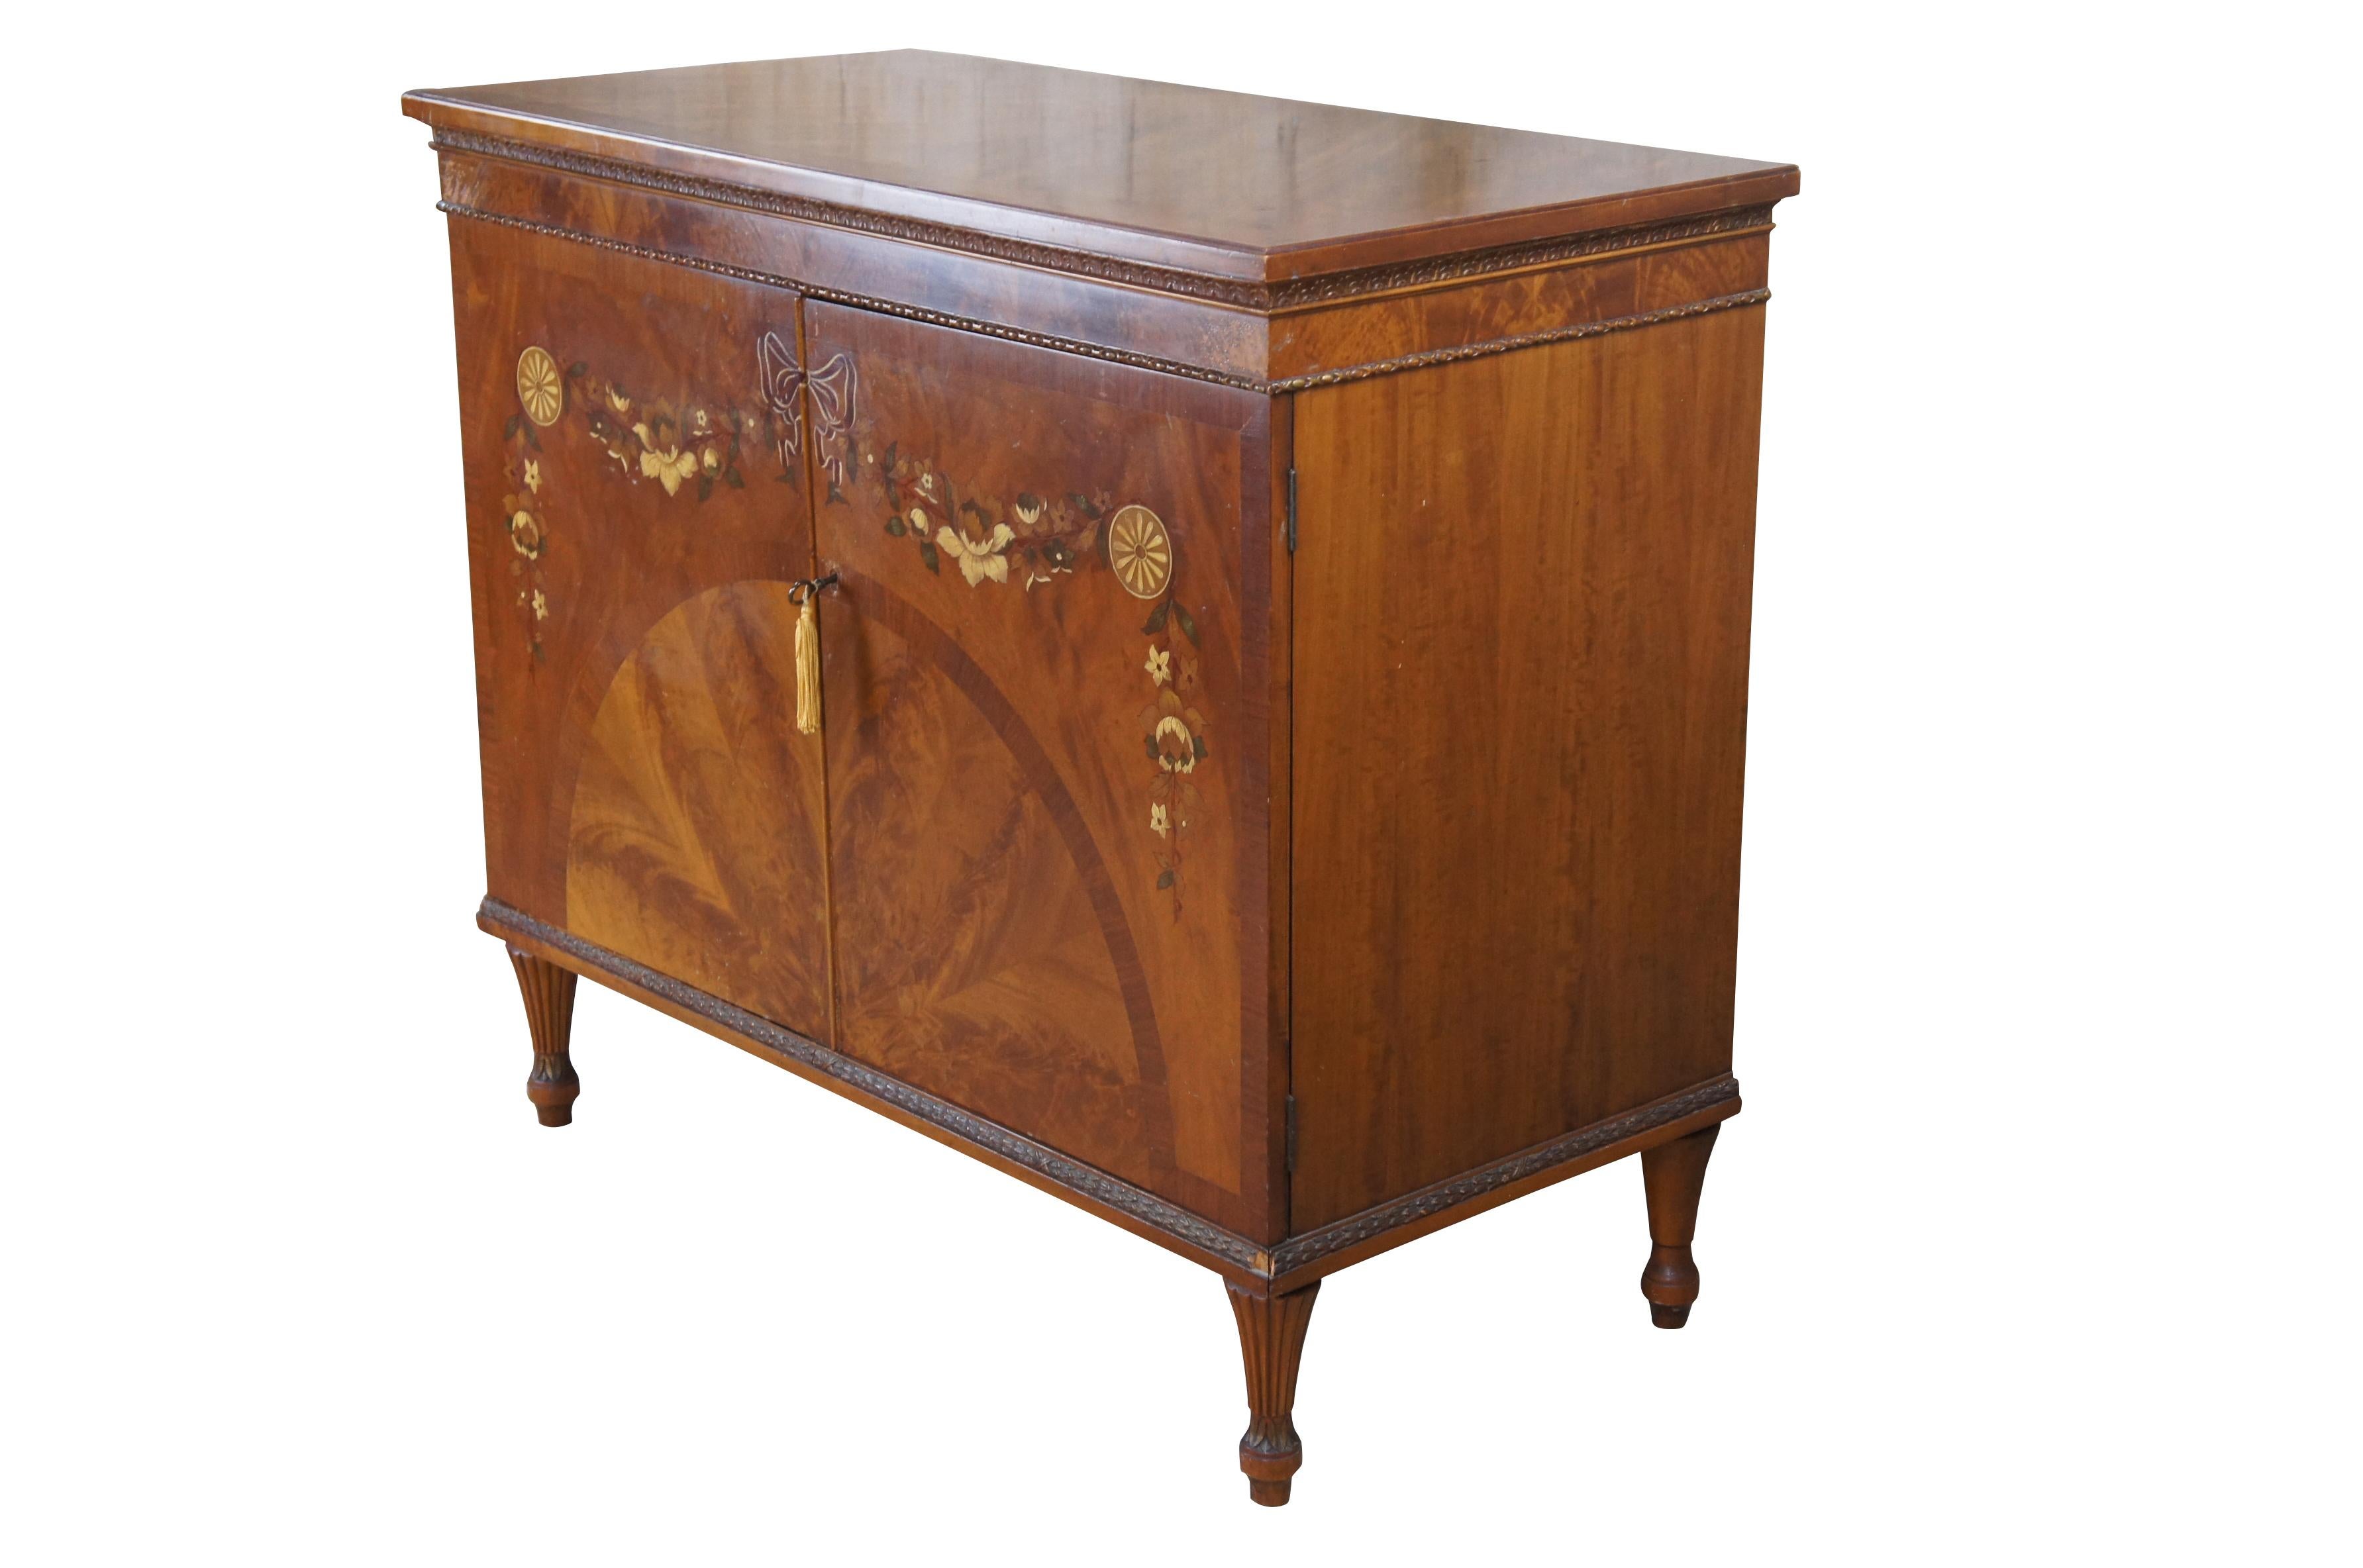 Antique satinwood buffet / cabinet / sideboard / console / Credenza / Huntboard featuring Italian Neoclassical and Art Deco styling with inlaid sunburst / starburst veneer surrounded by hand painted  floral wreath with ribbons, bows and pinwheels. 